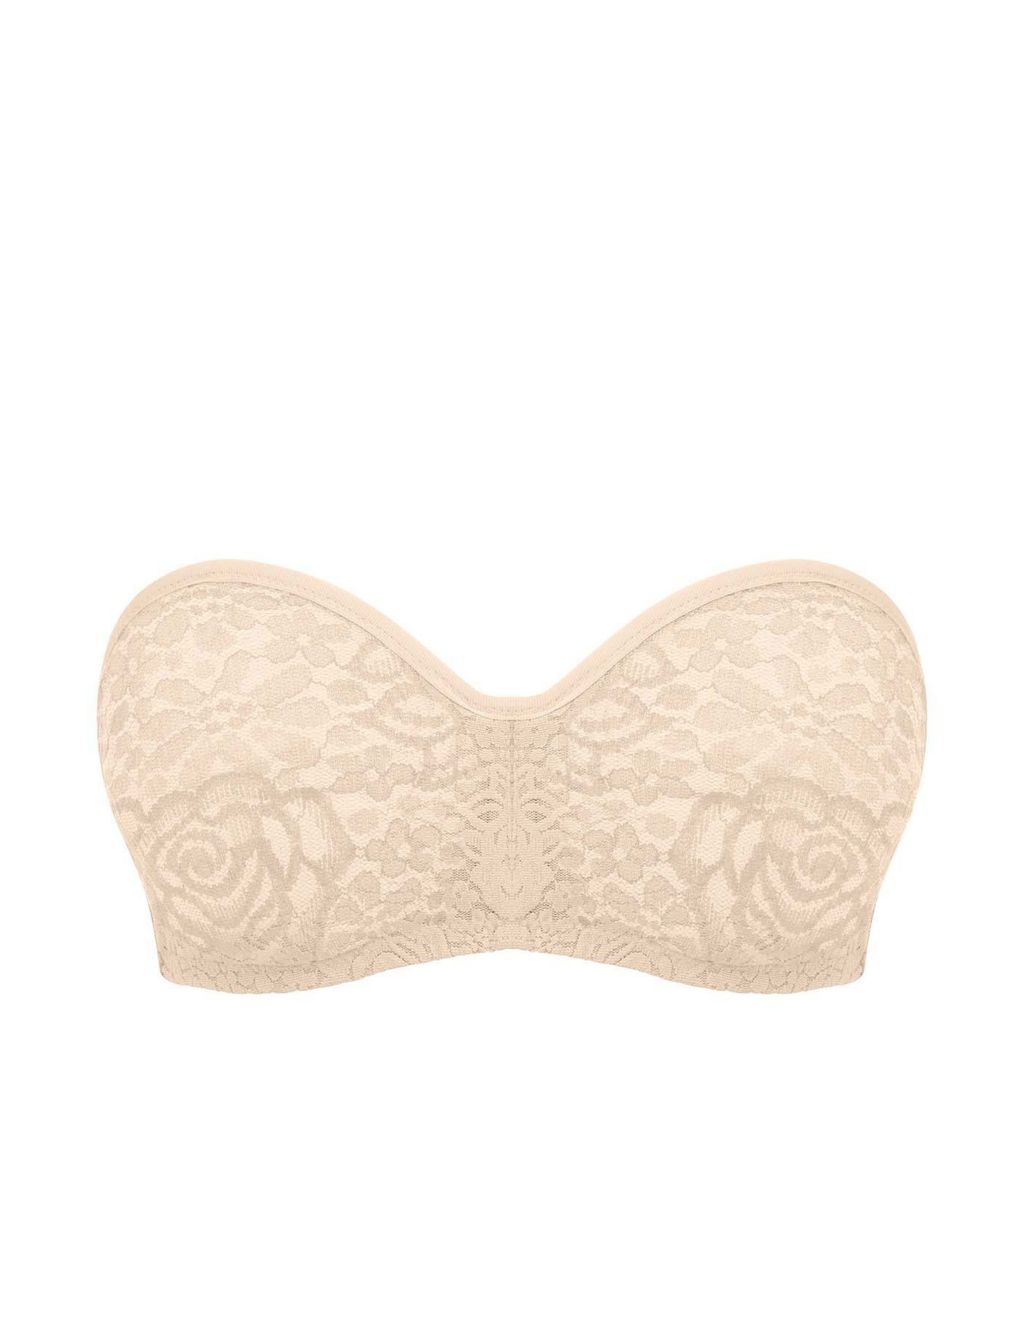 Halo Floral Lace Wired Strapless Bra image 2